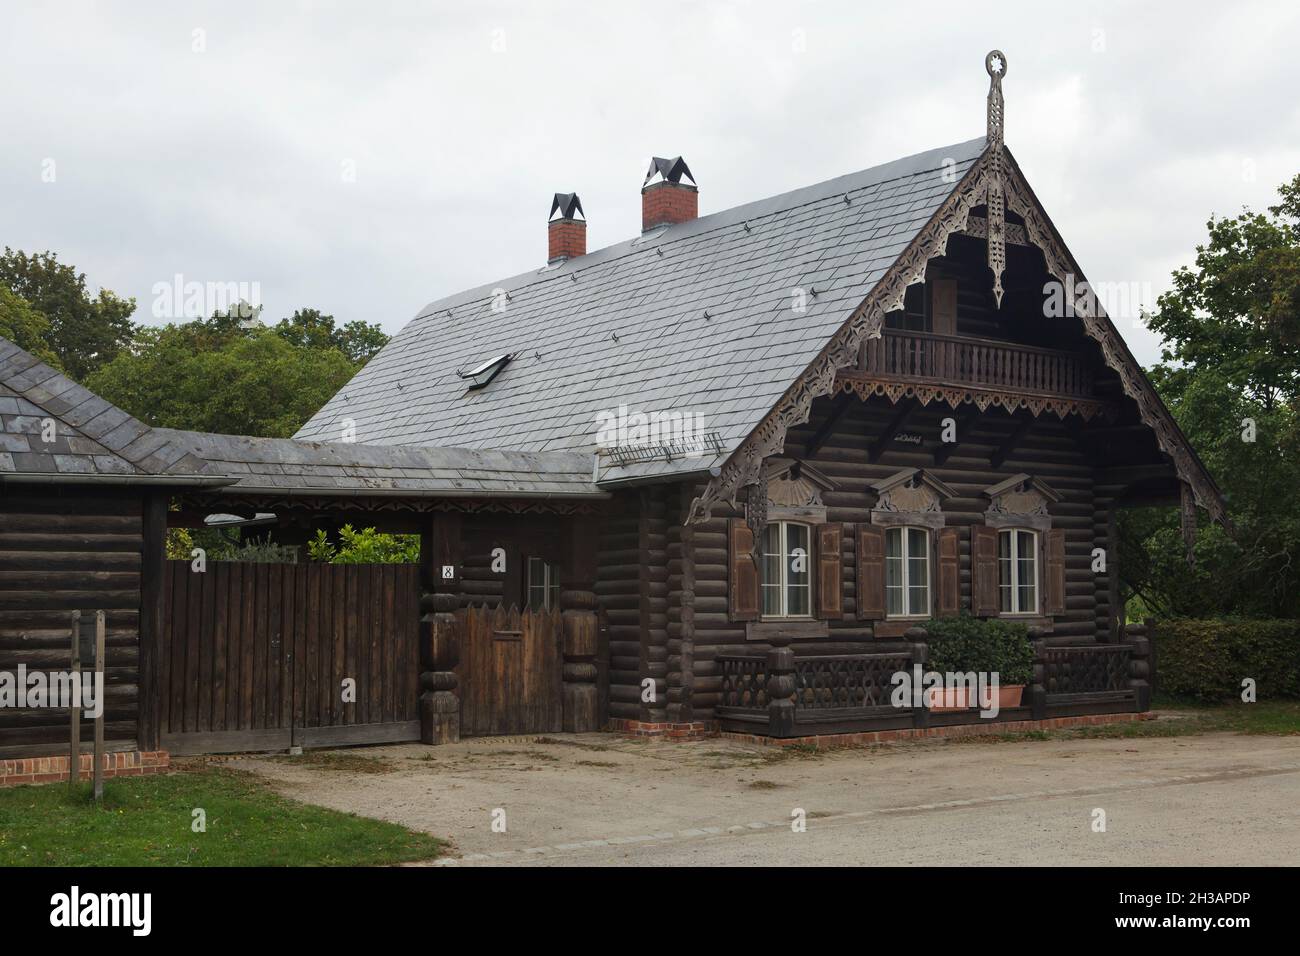 One of the traditional Russian wooden houses in the Russian Colony Alexandrowka (Russische Kolonie Alexandrowka) in Potsdam, Germany. Stock Photo